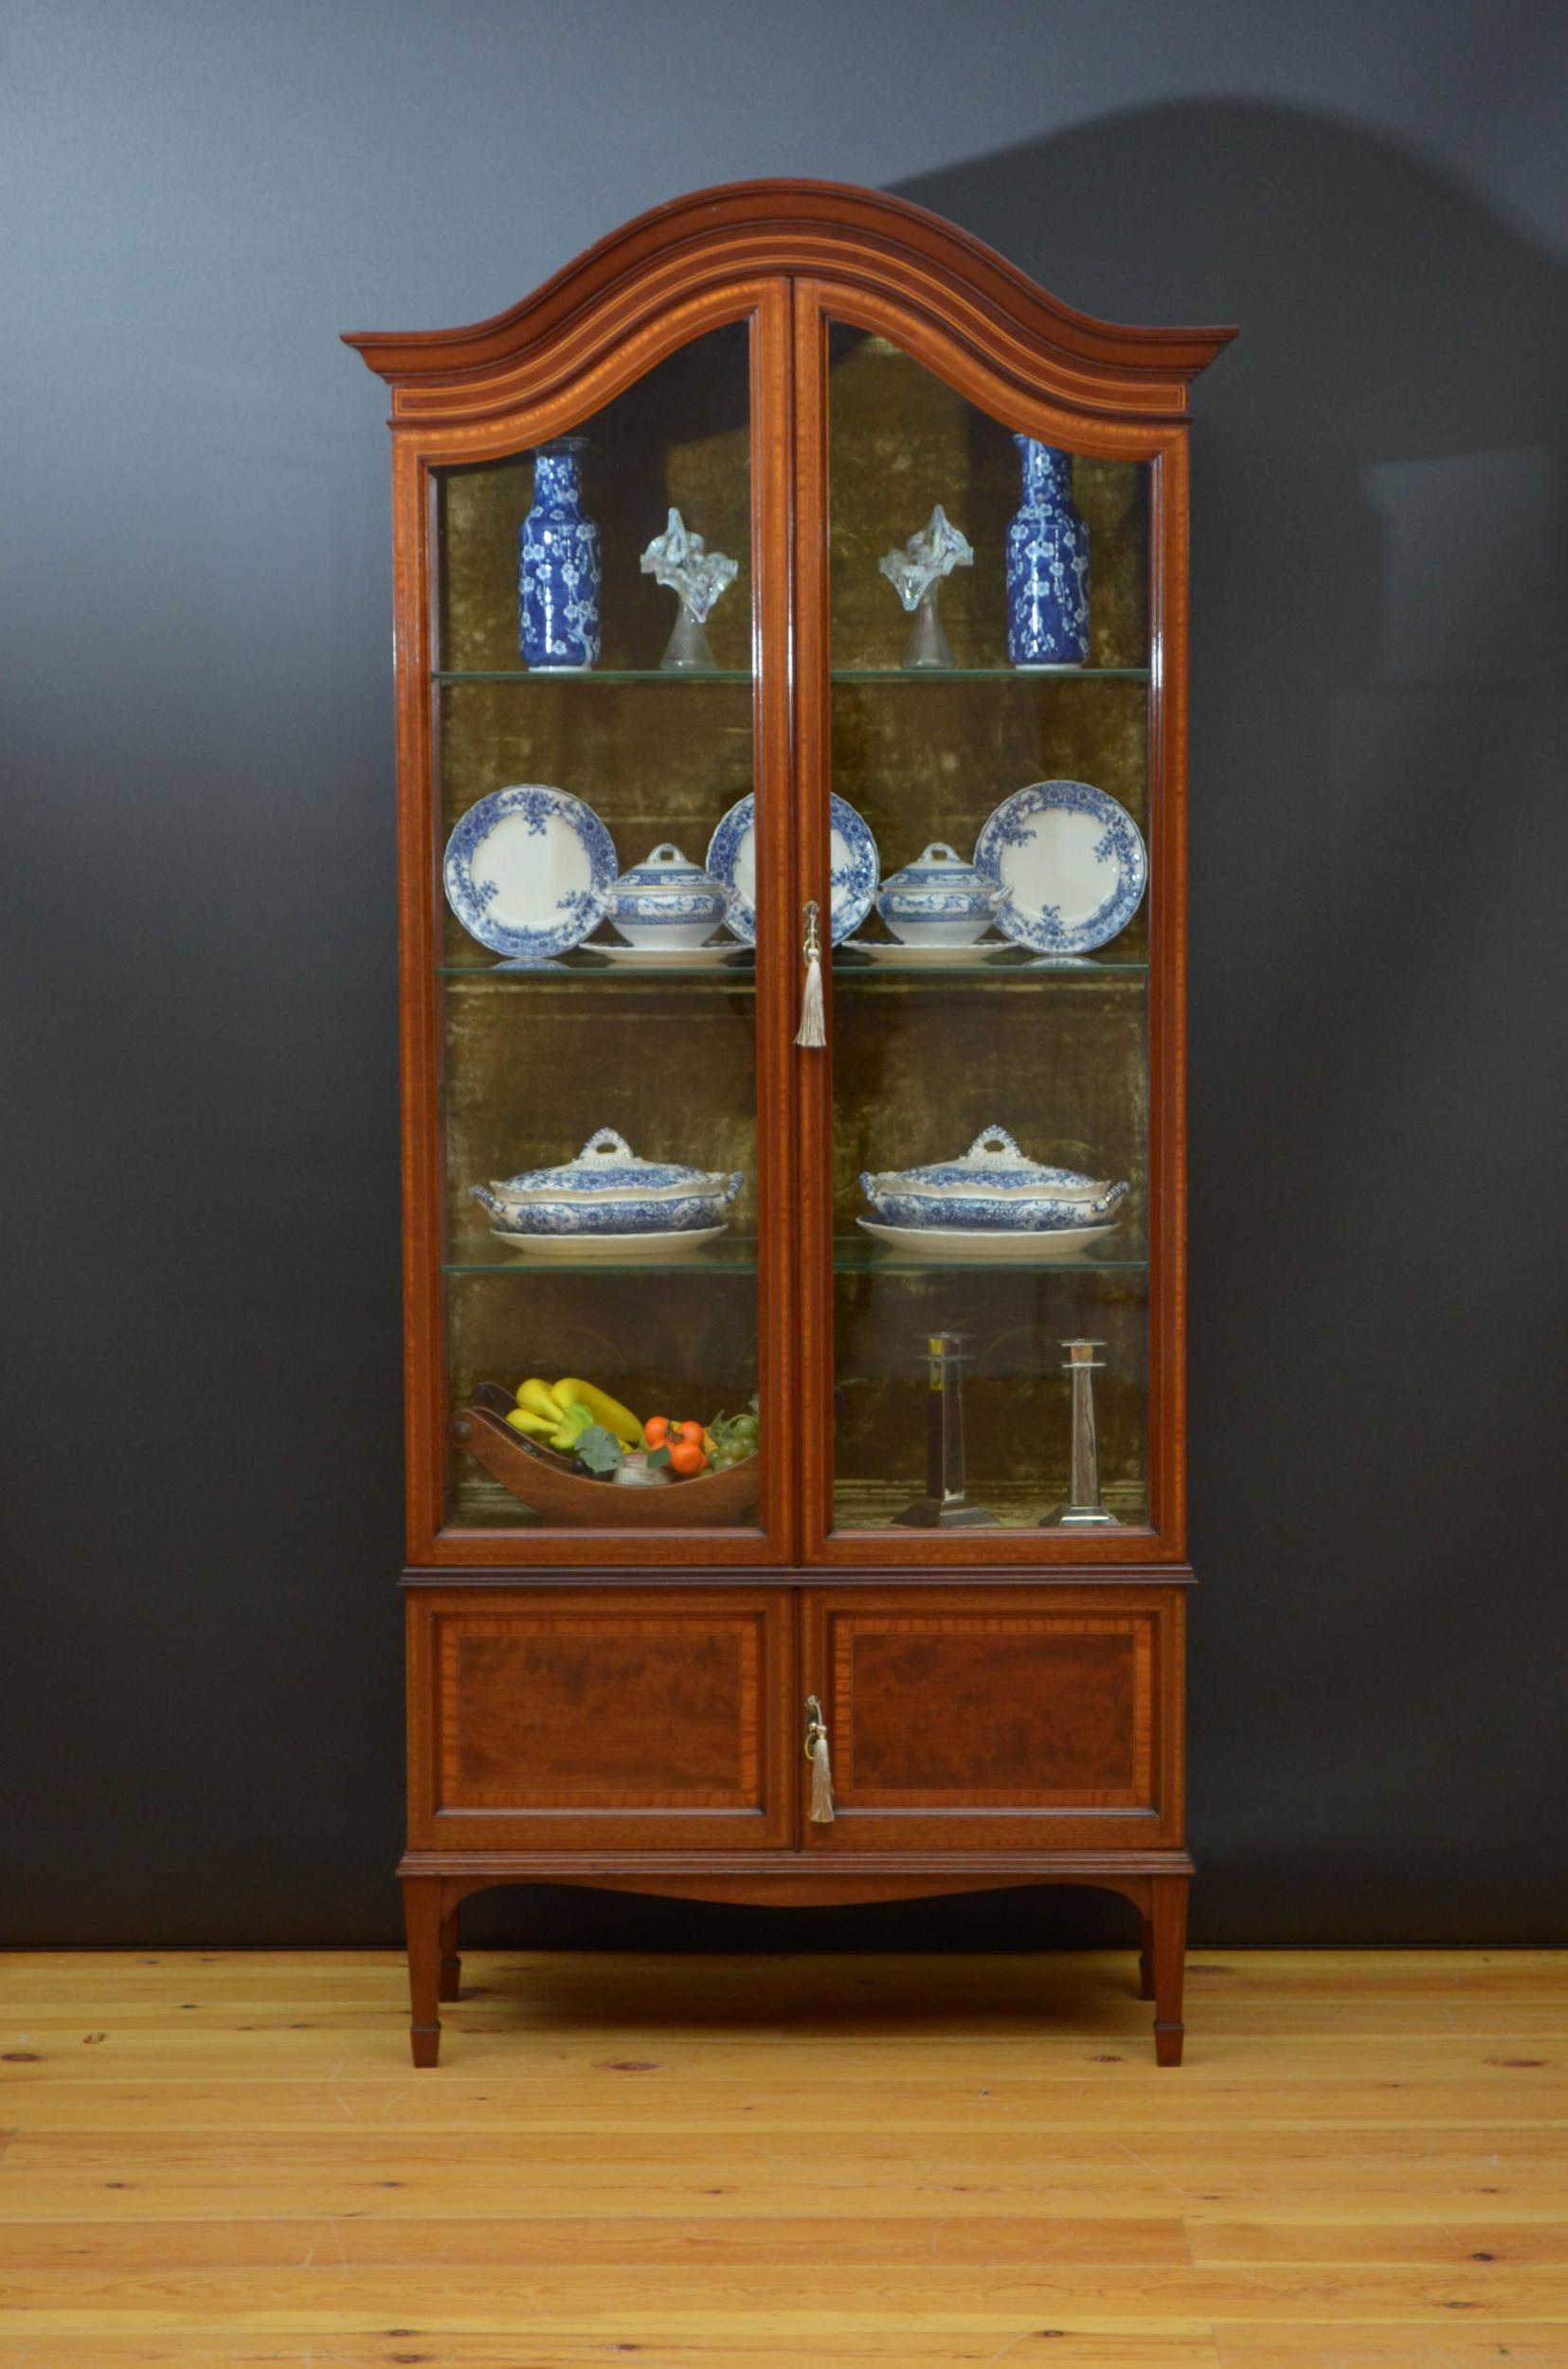 Sn5028, fine quality and very elegant Edwardian mahogany and inlaid display cabinet or arched form, having cavetto cornice above double string inlaid frieze and a pair of satinwood crossbanded glass doors fitted with original working lock stamped S